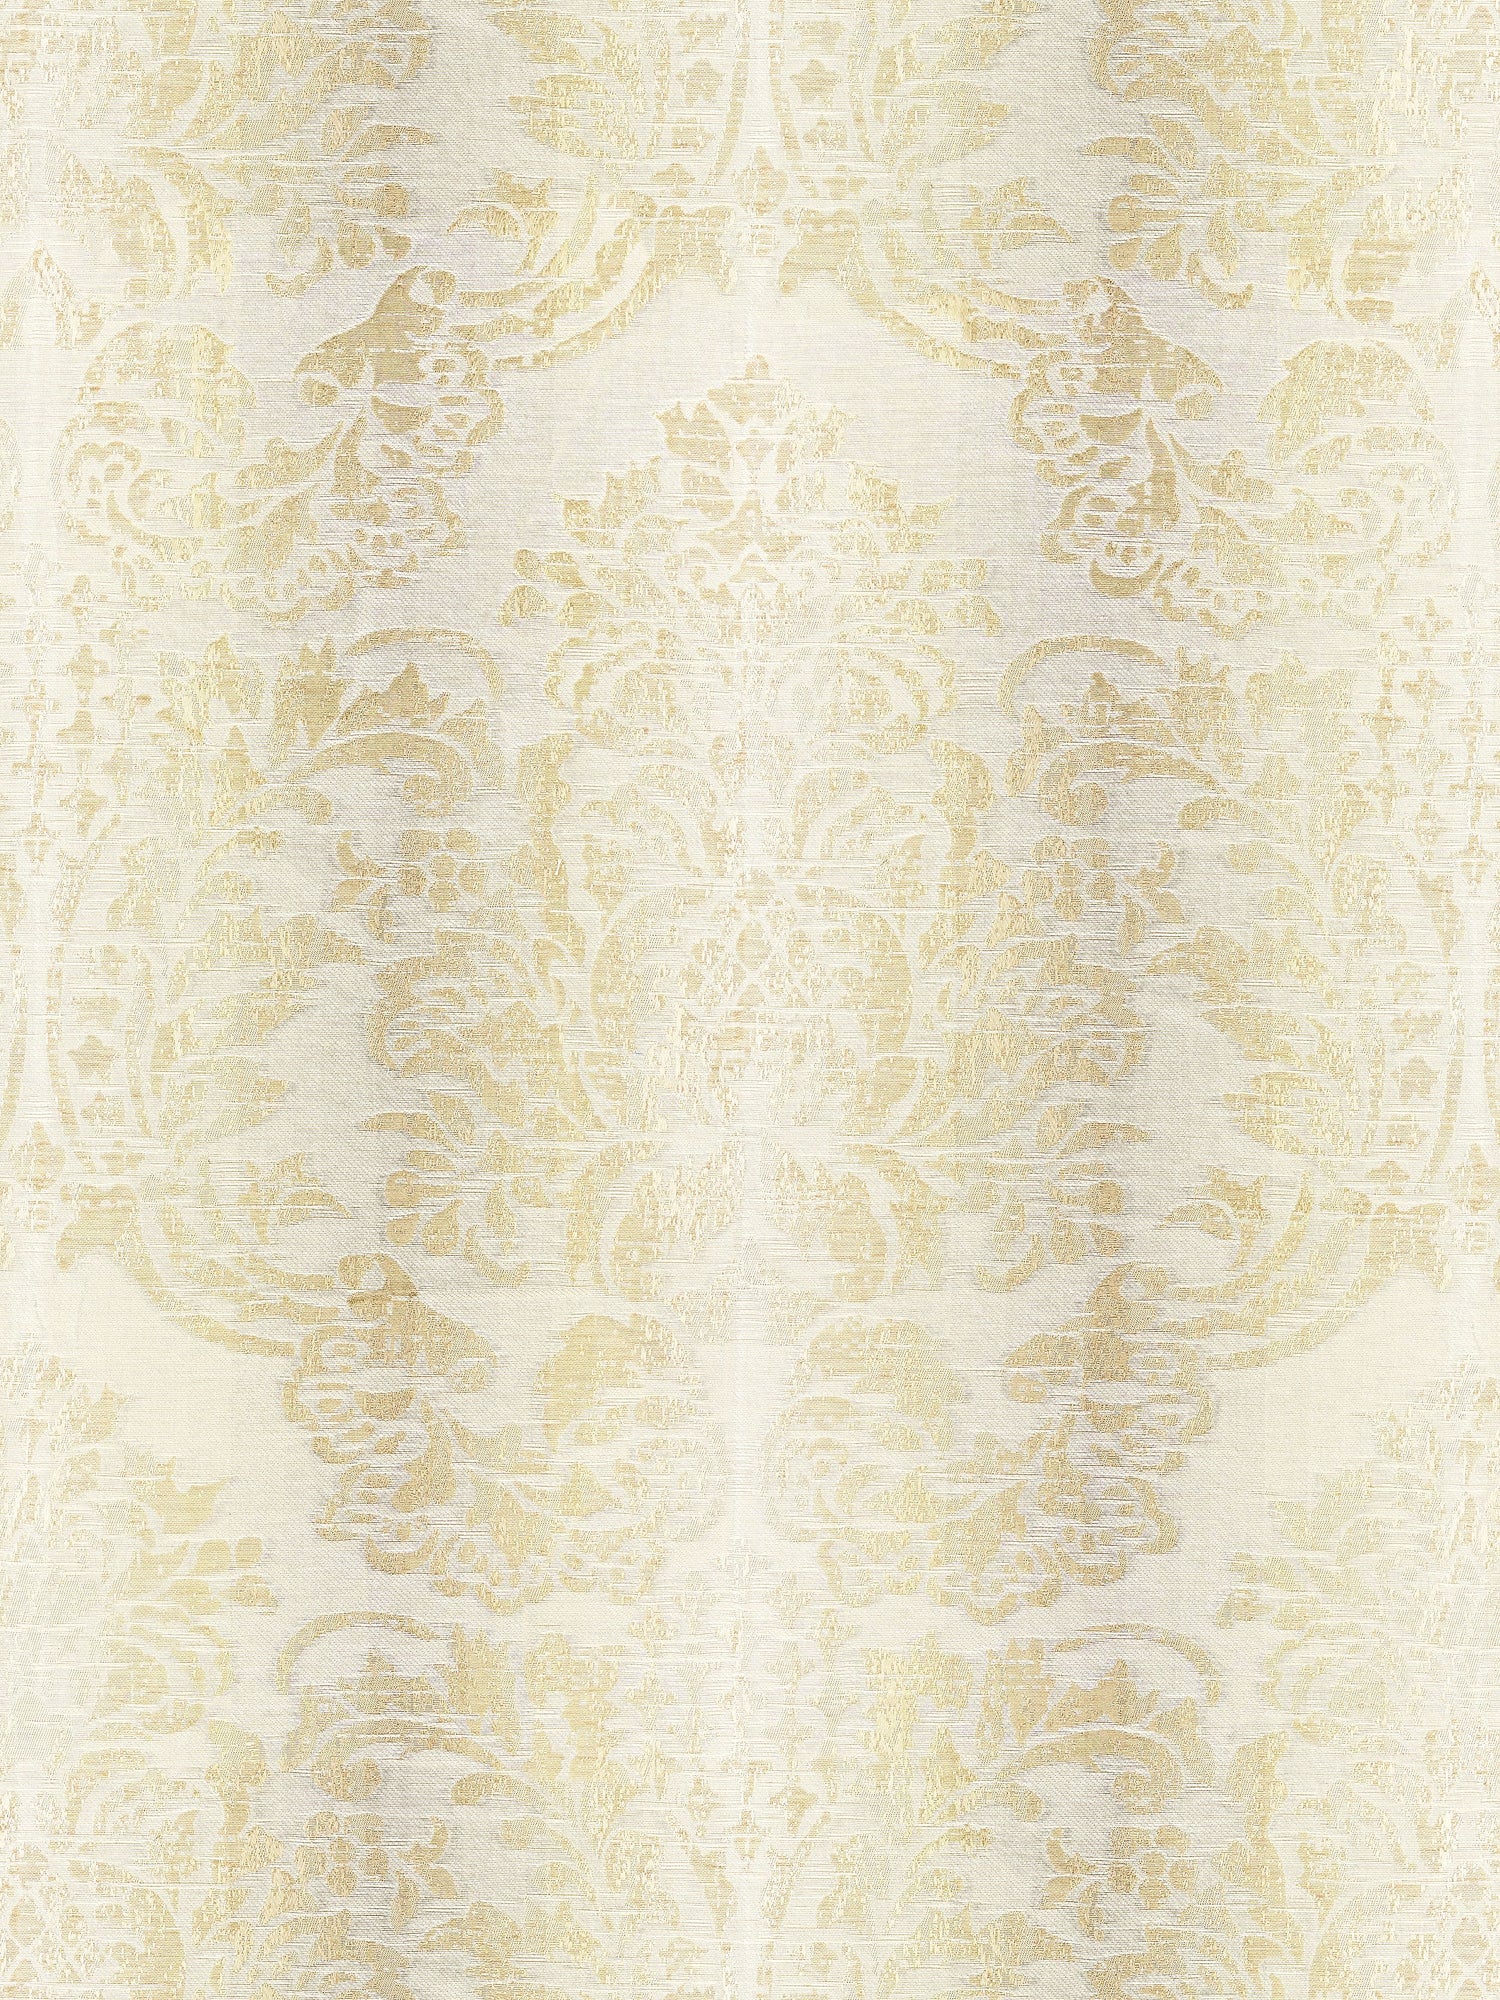 Sorrento Linen Damask fabric in parchment color - pattern number SC 000127093 - by Scalamandre in the Scalamandre Fabrics Book 1 collection